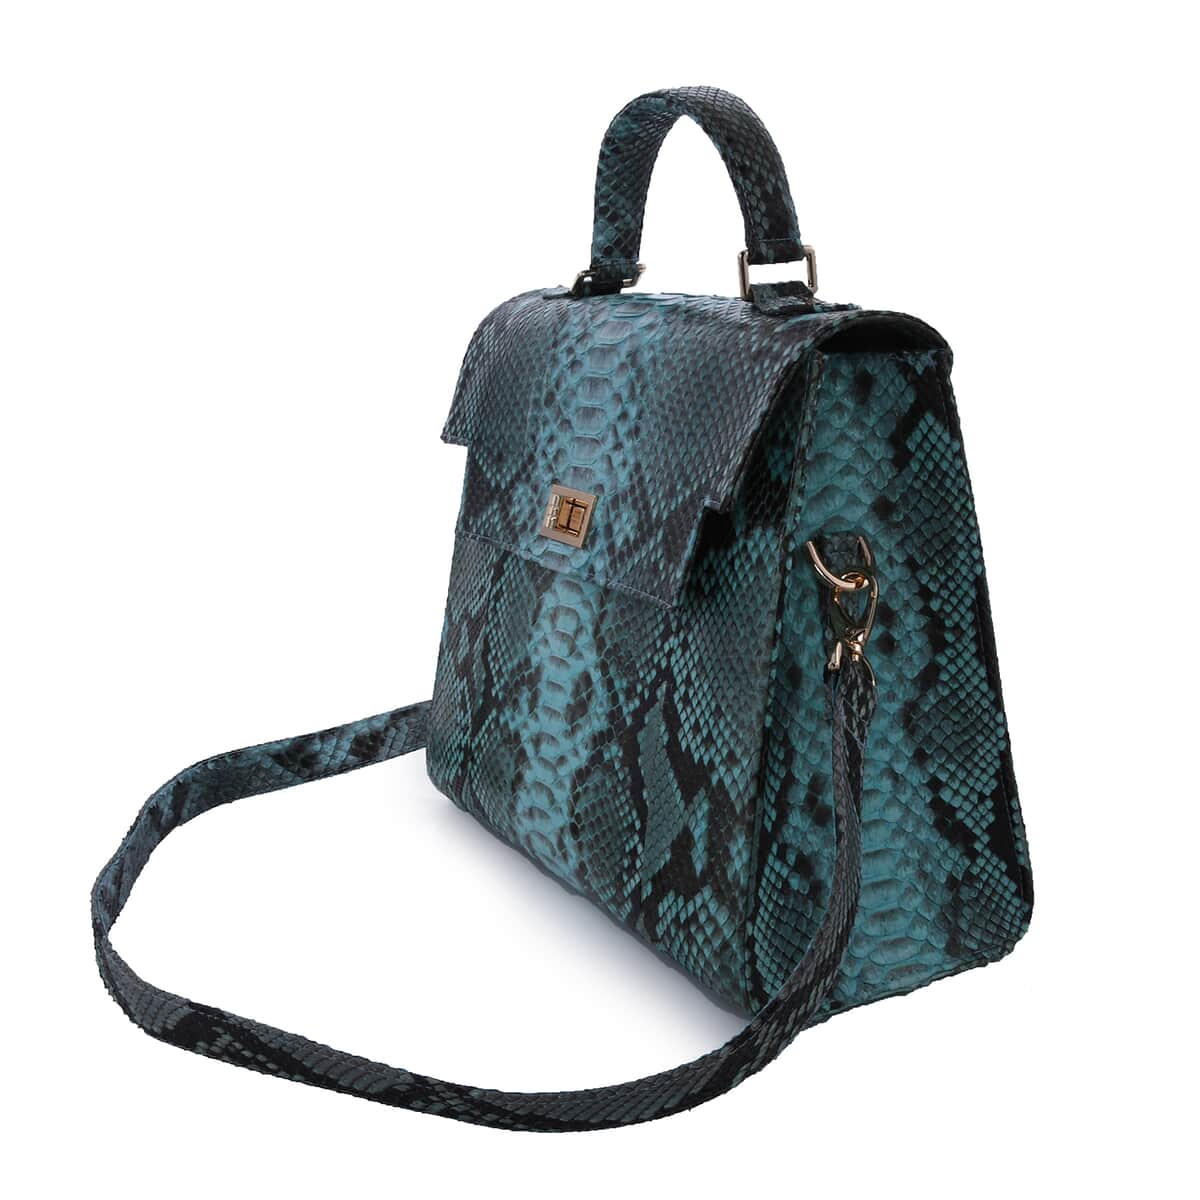 The Pelle Python Skin Bag Collection Blue Turquoise Color 100% Genuine Python Leather Tote Bag image number 3